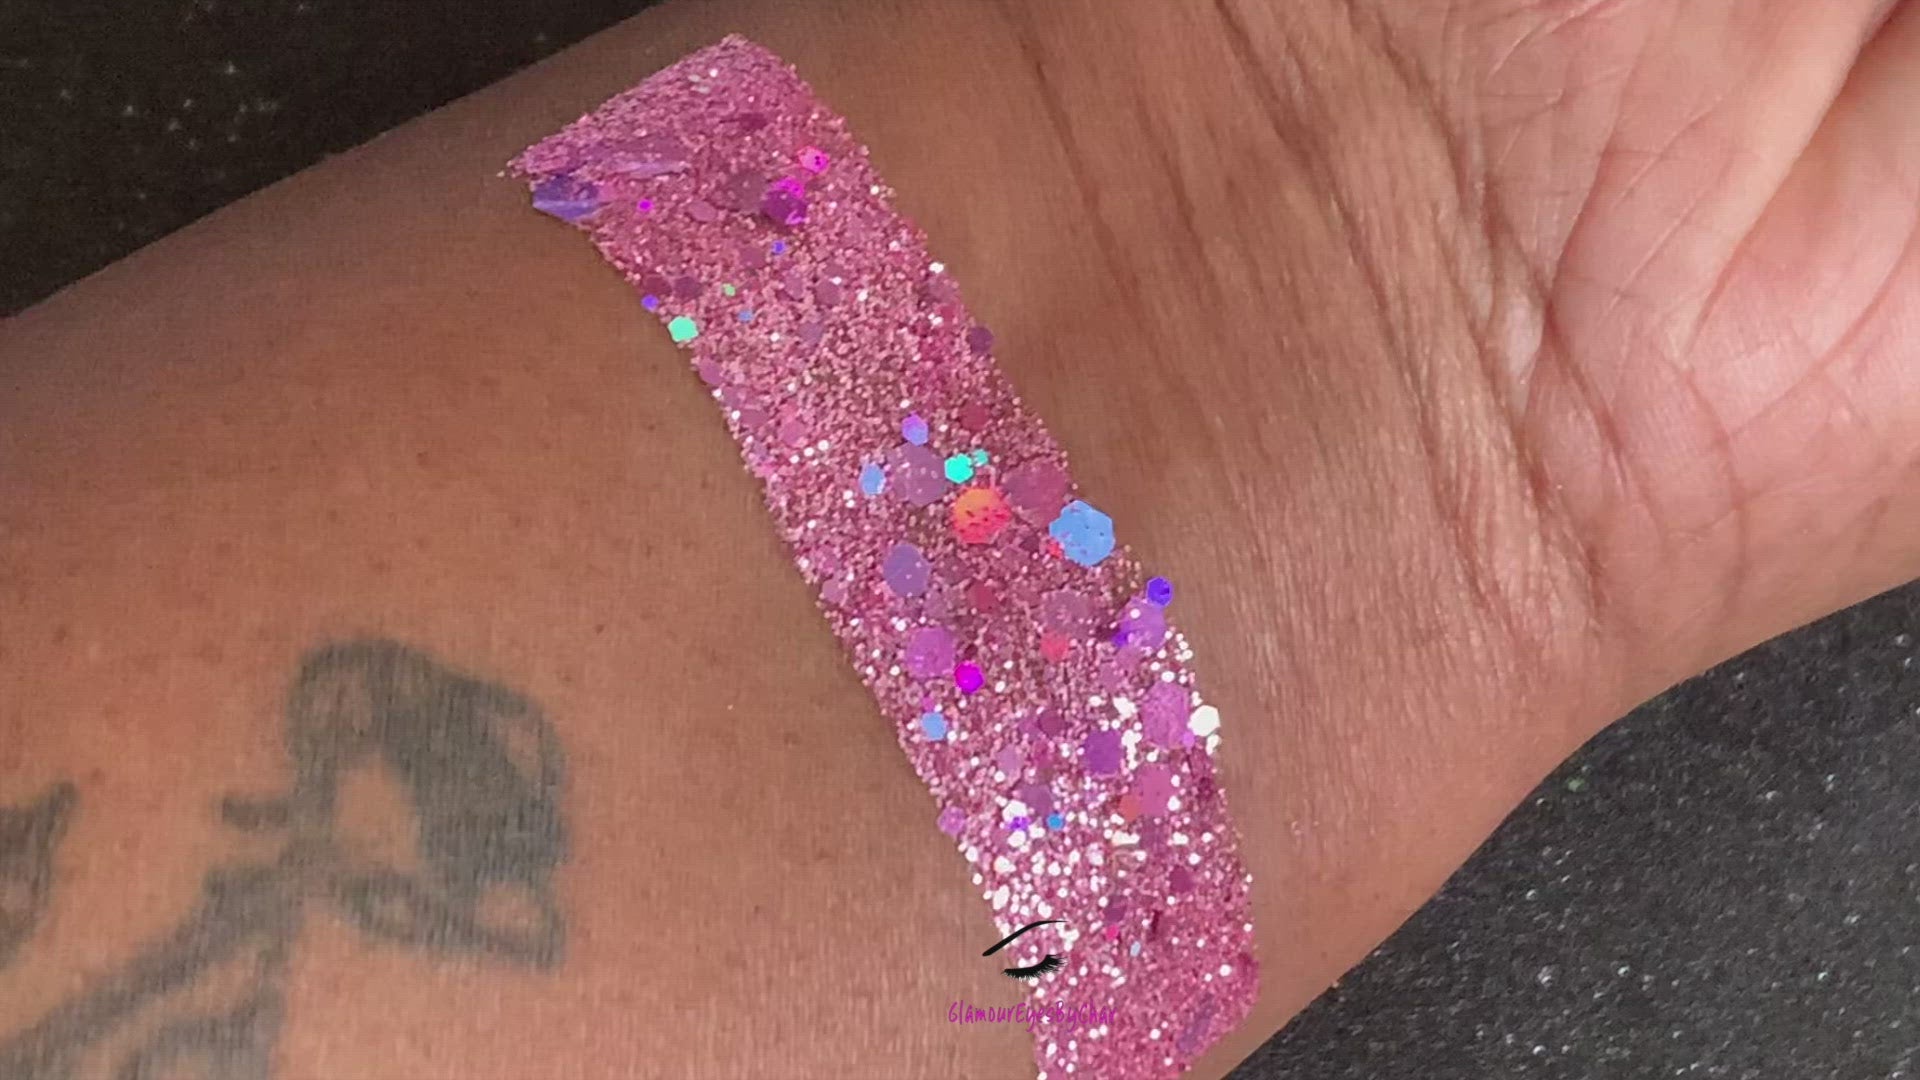 This glitter is called Girl Power and is part of the super chunky glitter collection. It consists of pink and light purple glitter with a holographic sparkle. Girl Power can be used for your face, body, hair and nails. Comes in 5g jars only.